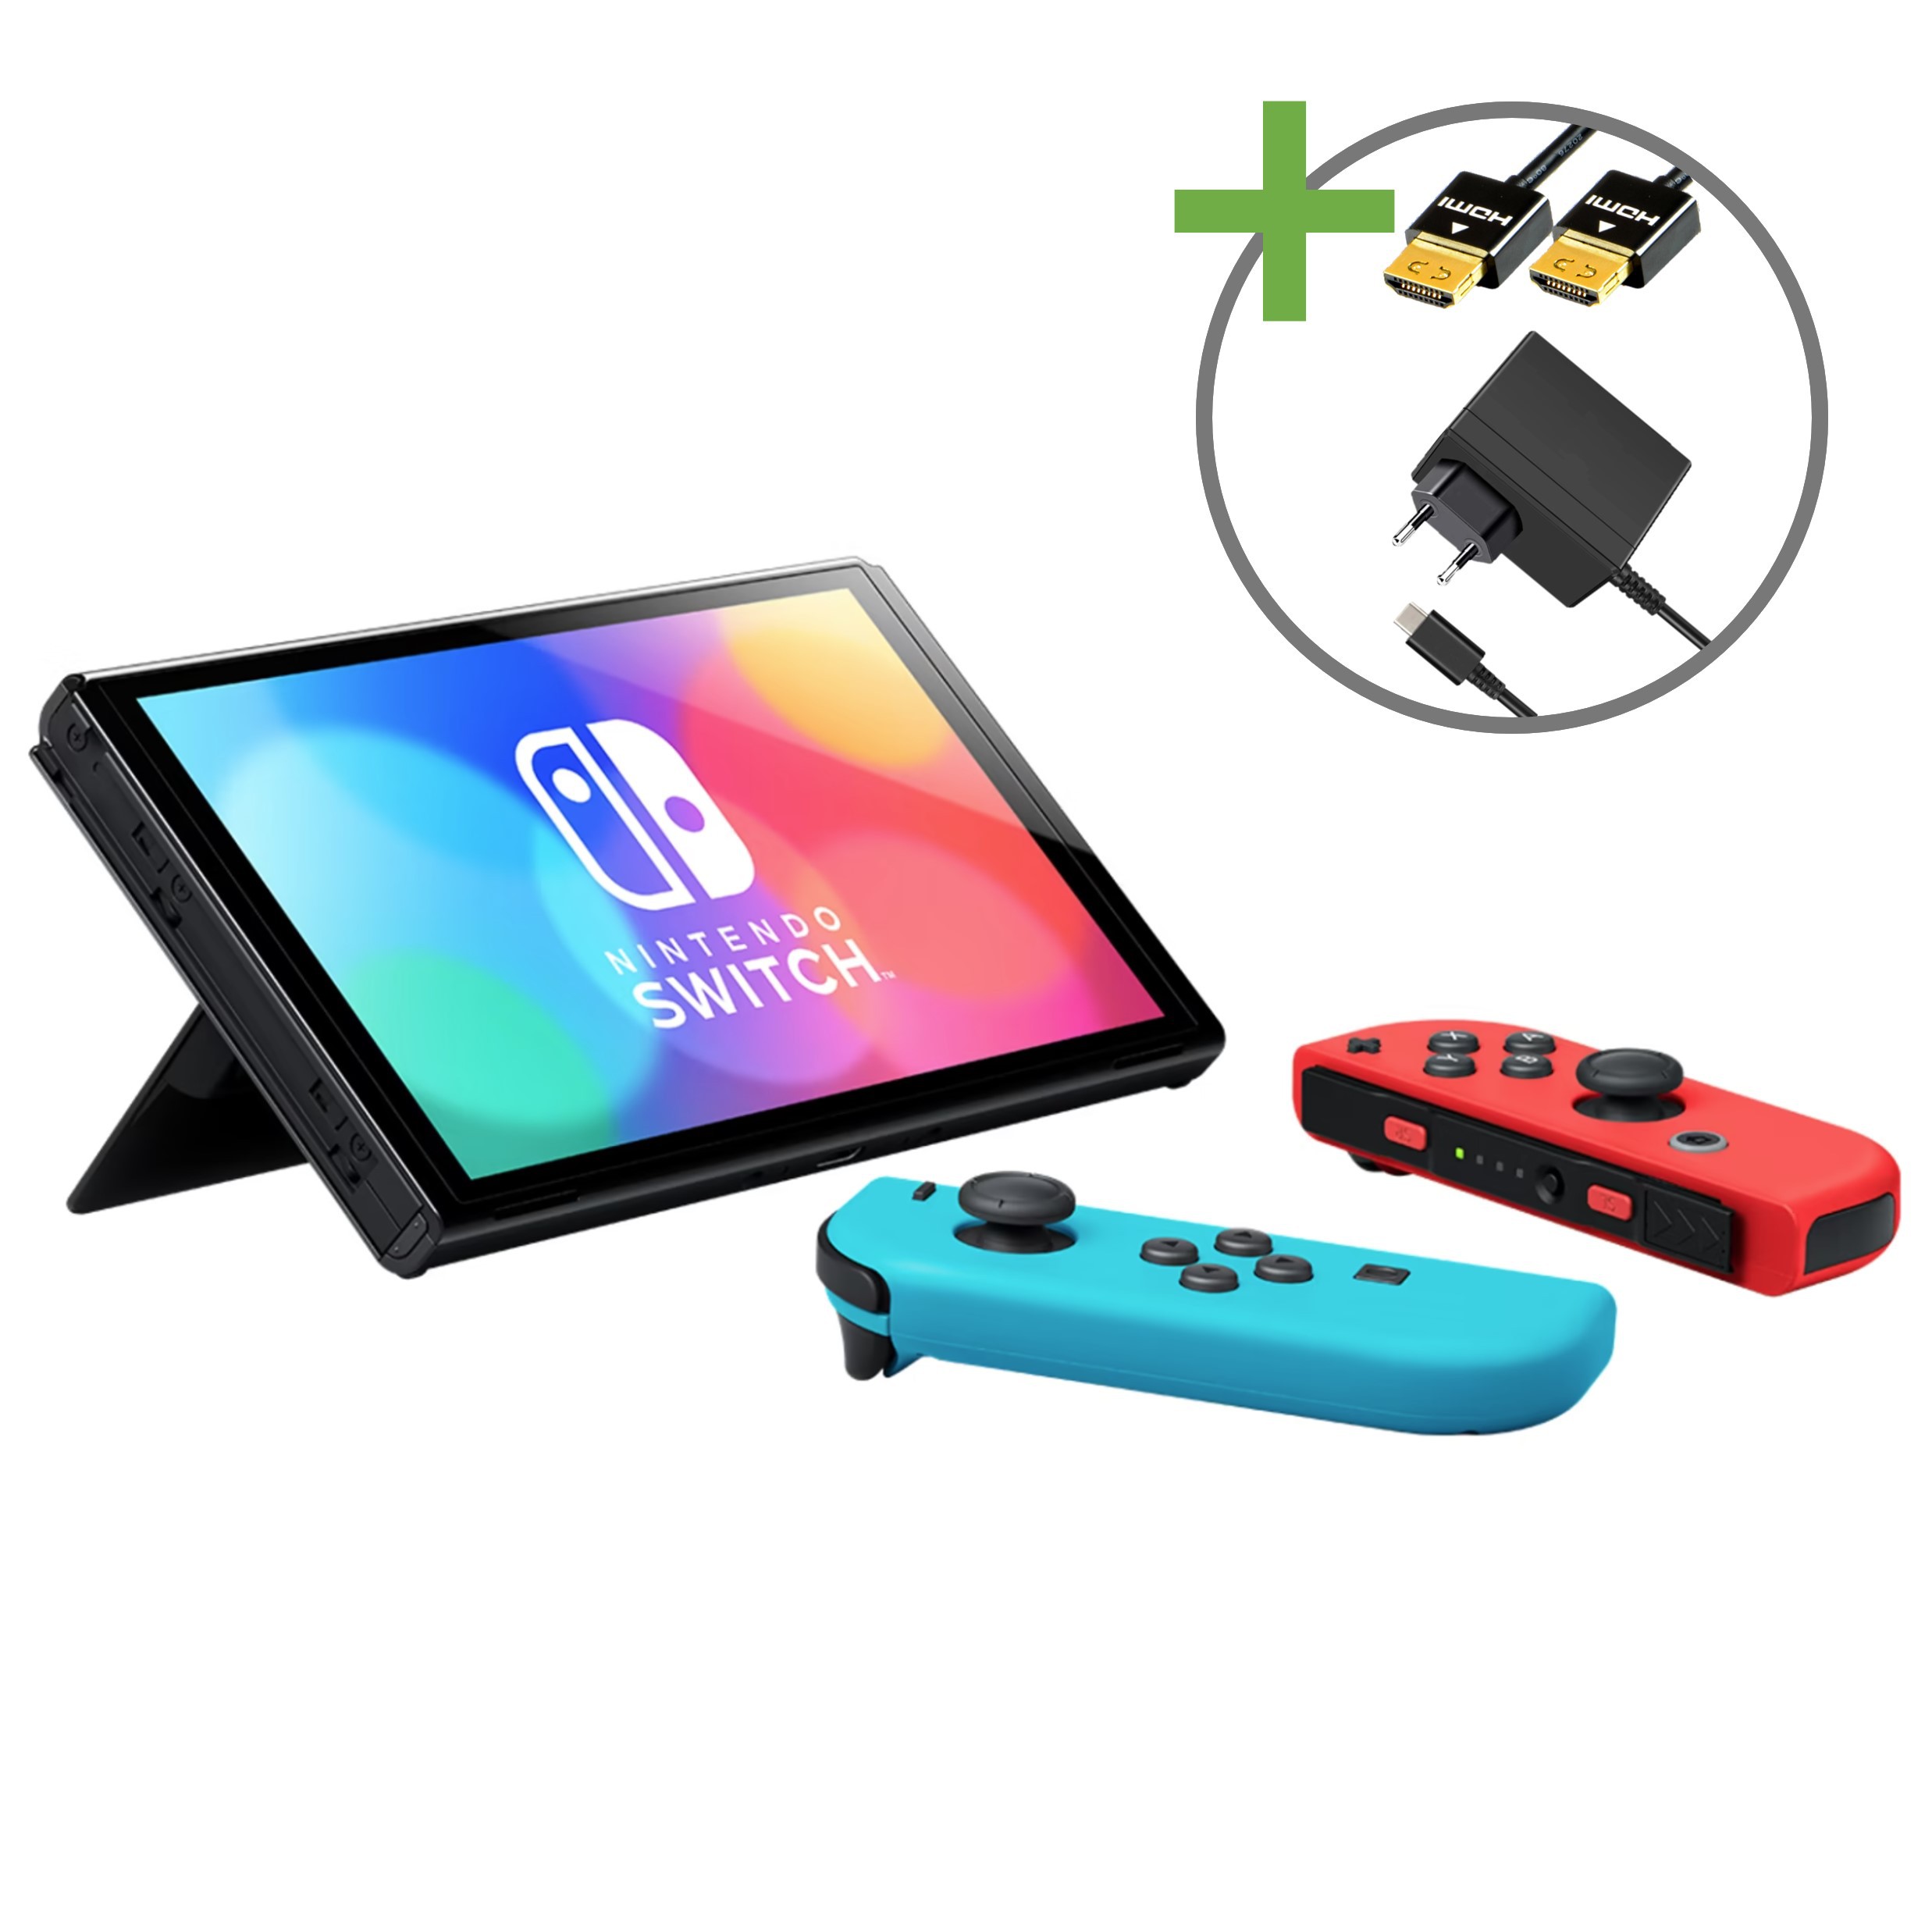 Nintendo Switch Console OLED Starter Pack - Red/Blue - Nintendo Switch Hardware - 3